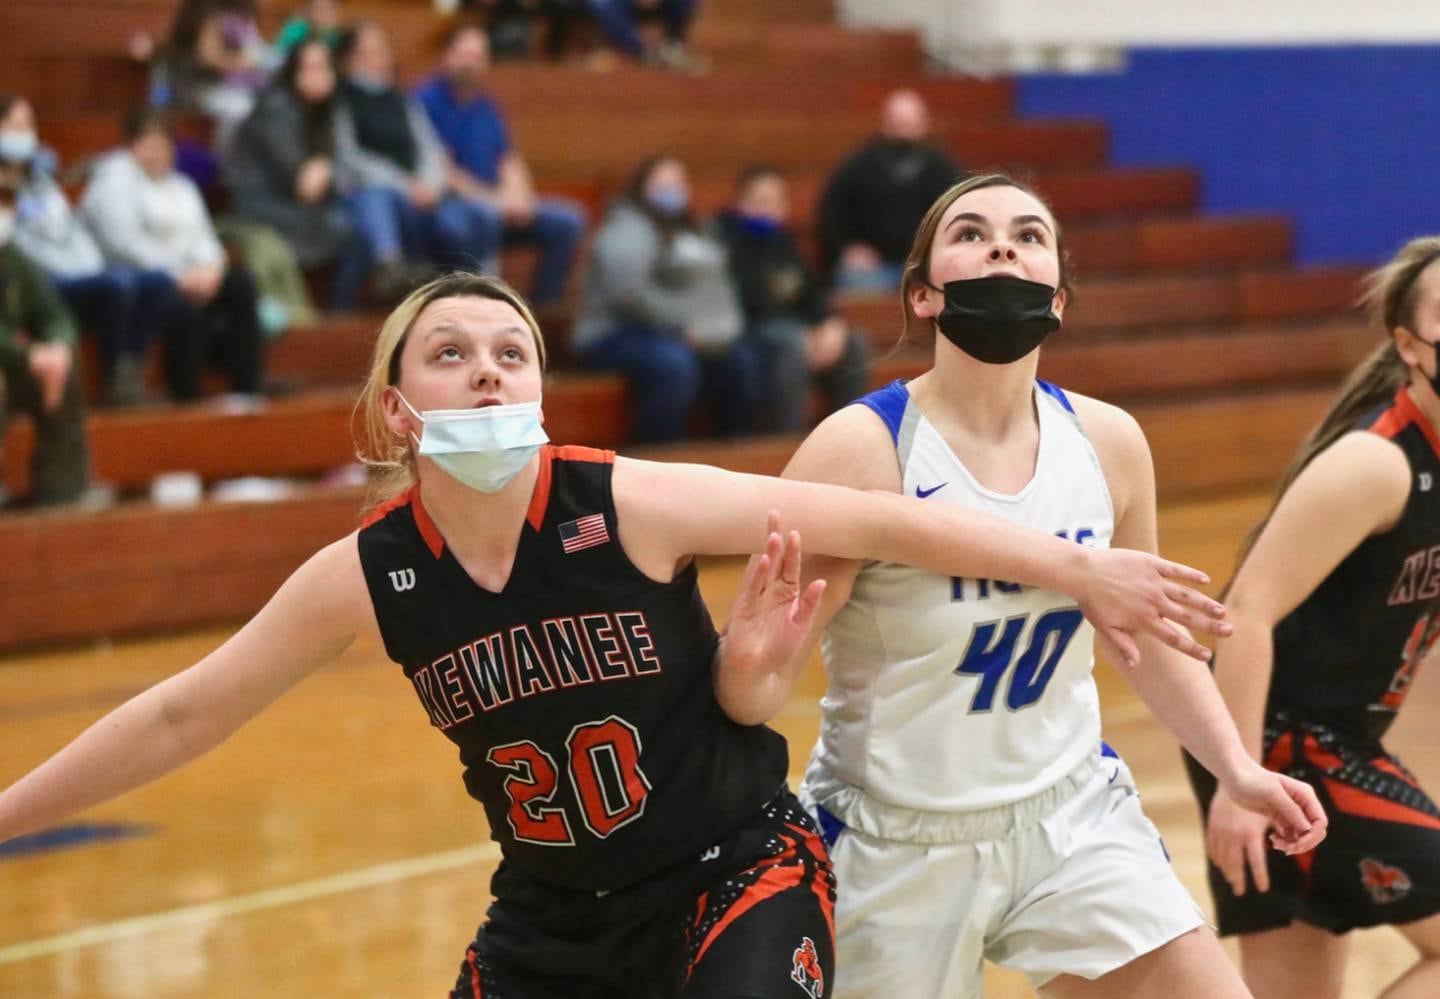 PHS senior Morgan Coleman and Kewanee's Lainey Kelly battled for position on a free throw Thursday at Prouty Gym. Coleman had 16 points to lead the Tigresses to a 55-45 Senior Night victory.